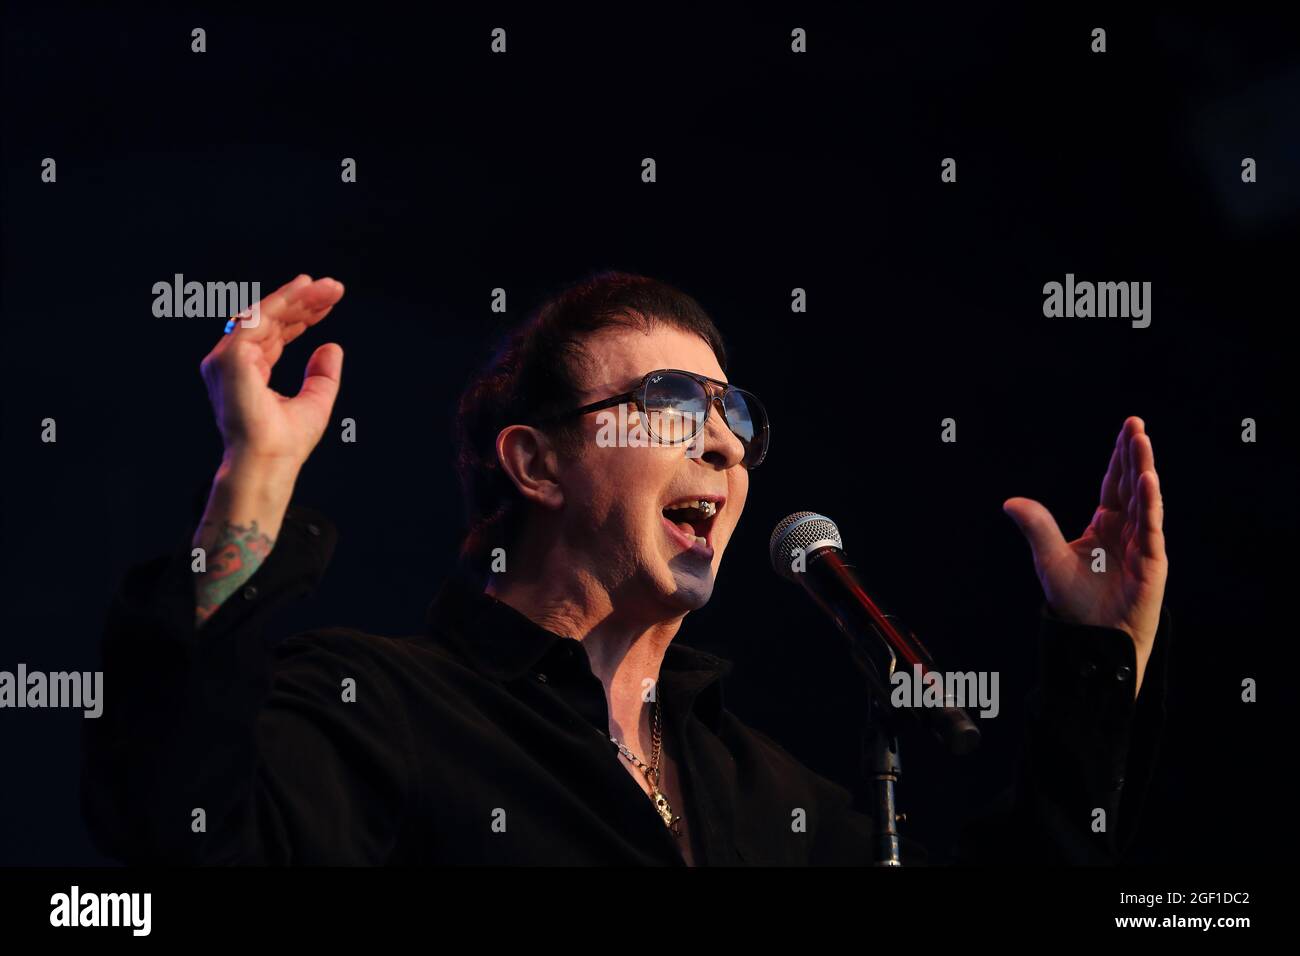 Henley-on-Thames, UK. 22nd Aug, 2021. Fans enjoy 1980's music at the Rewind South Music Festival in Henley-on-Thames with stars like Marc Almond, Bananarama, the Christians, Limahl and others. Credit: Uwe Deffner/Alamy Live News Stock Photo